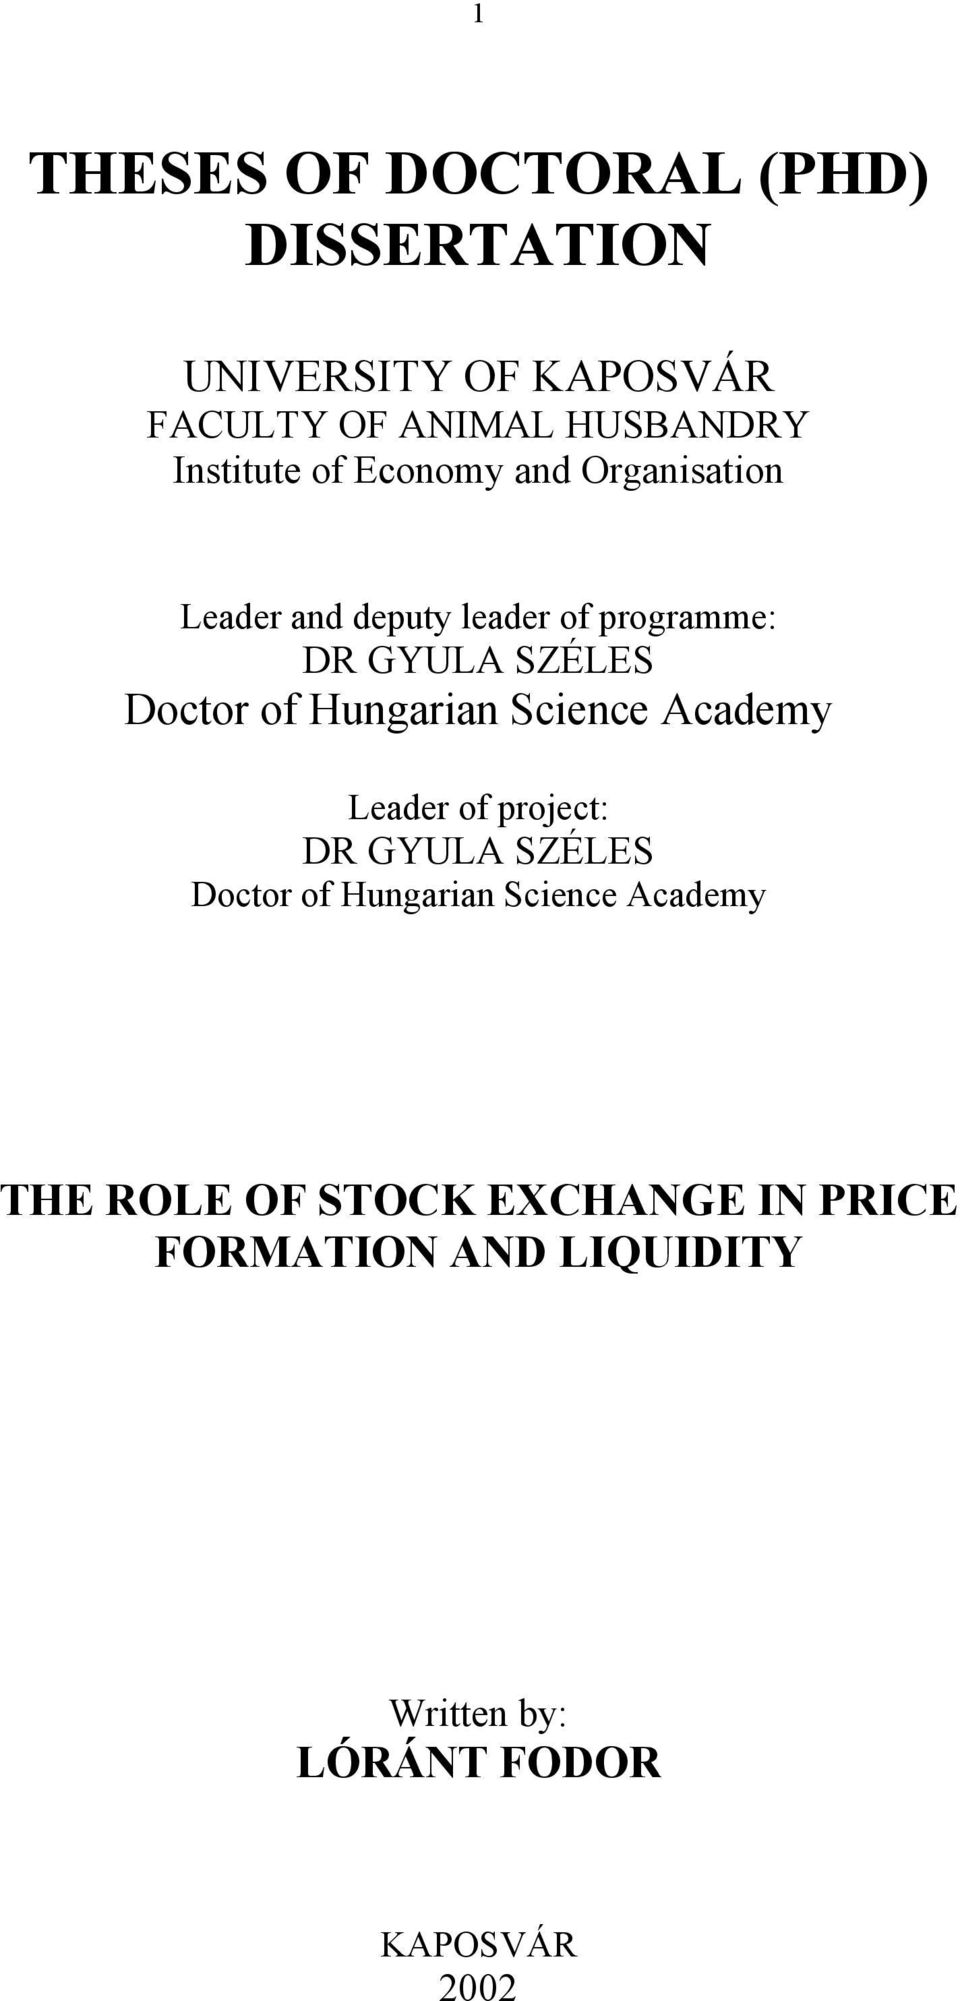 Doctor of Hungarian Science Academy Leader of project: DR GYULA SZÉLES Doctor of Hungarian